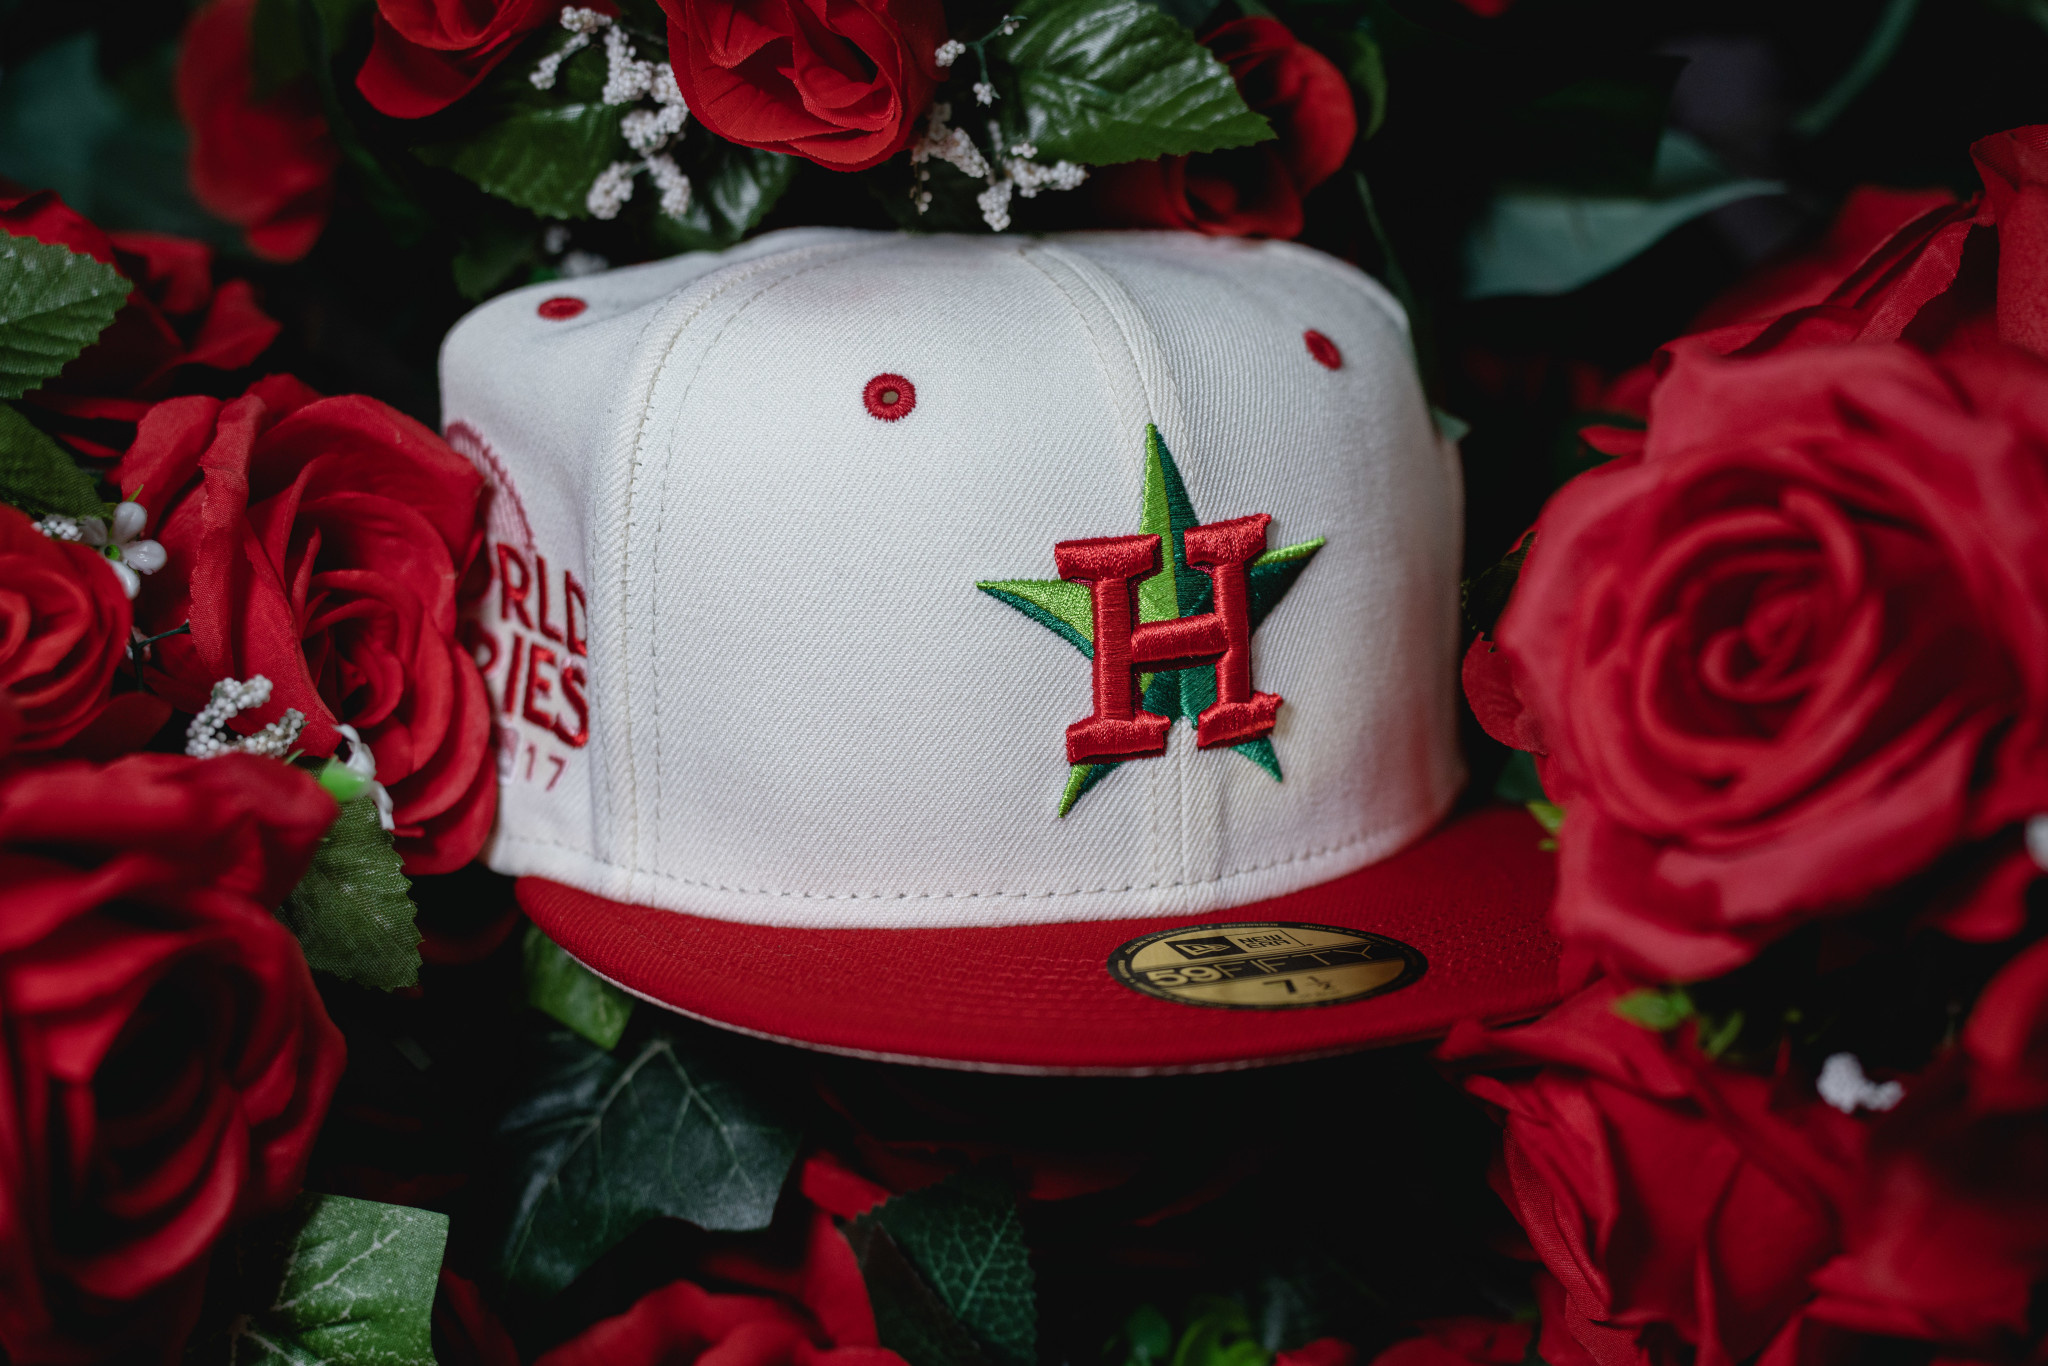 Eight One X New Era Astros East End Coffee - Eight One